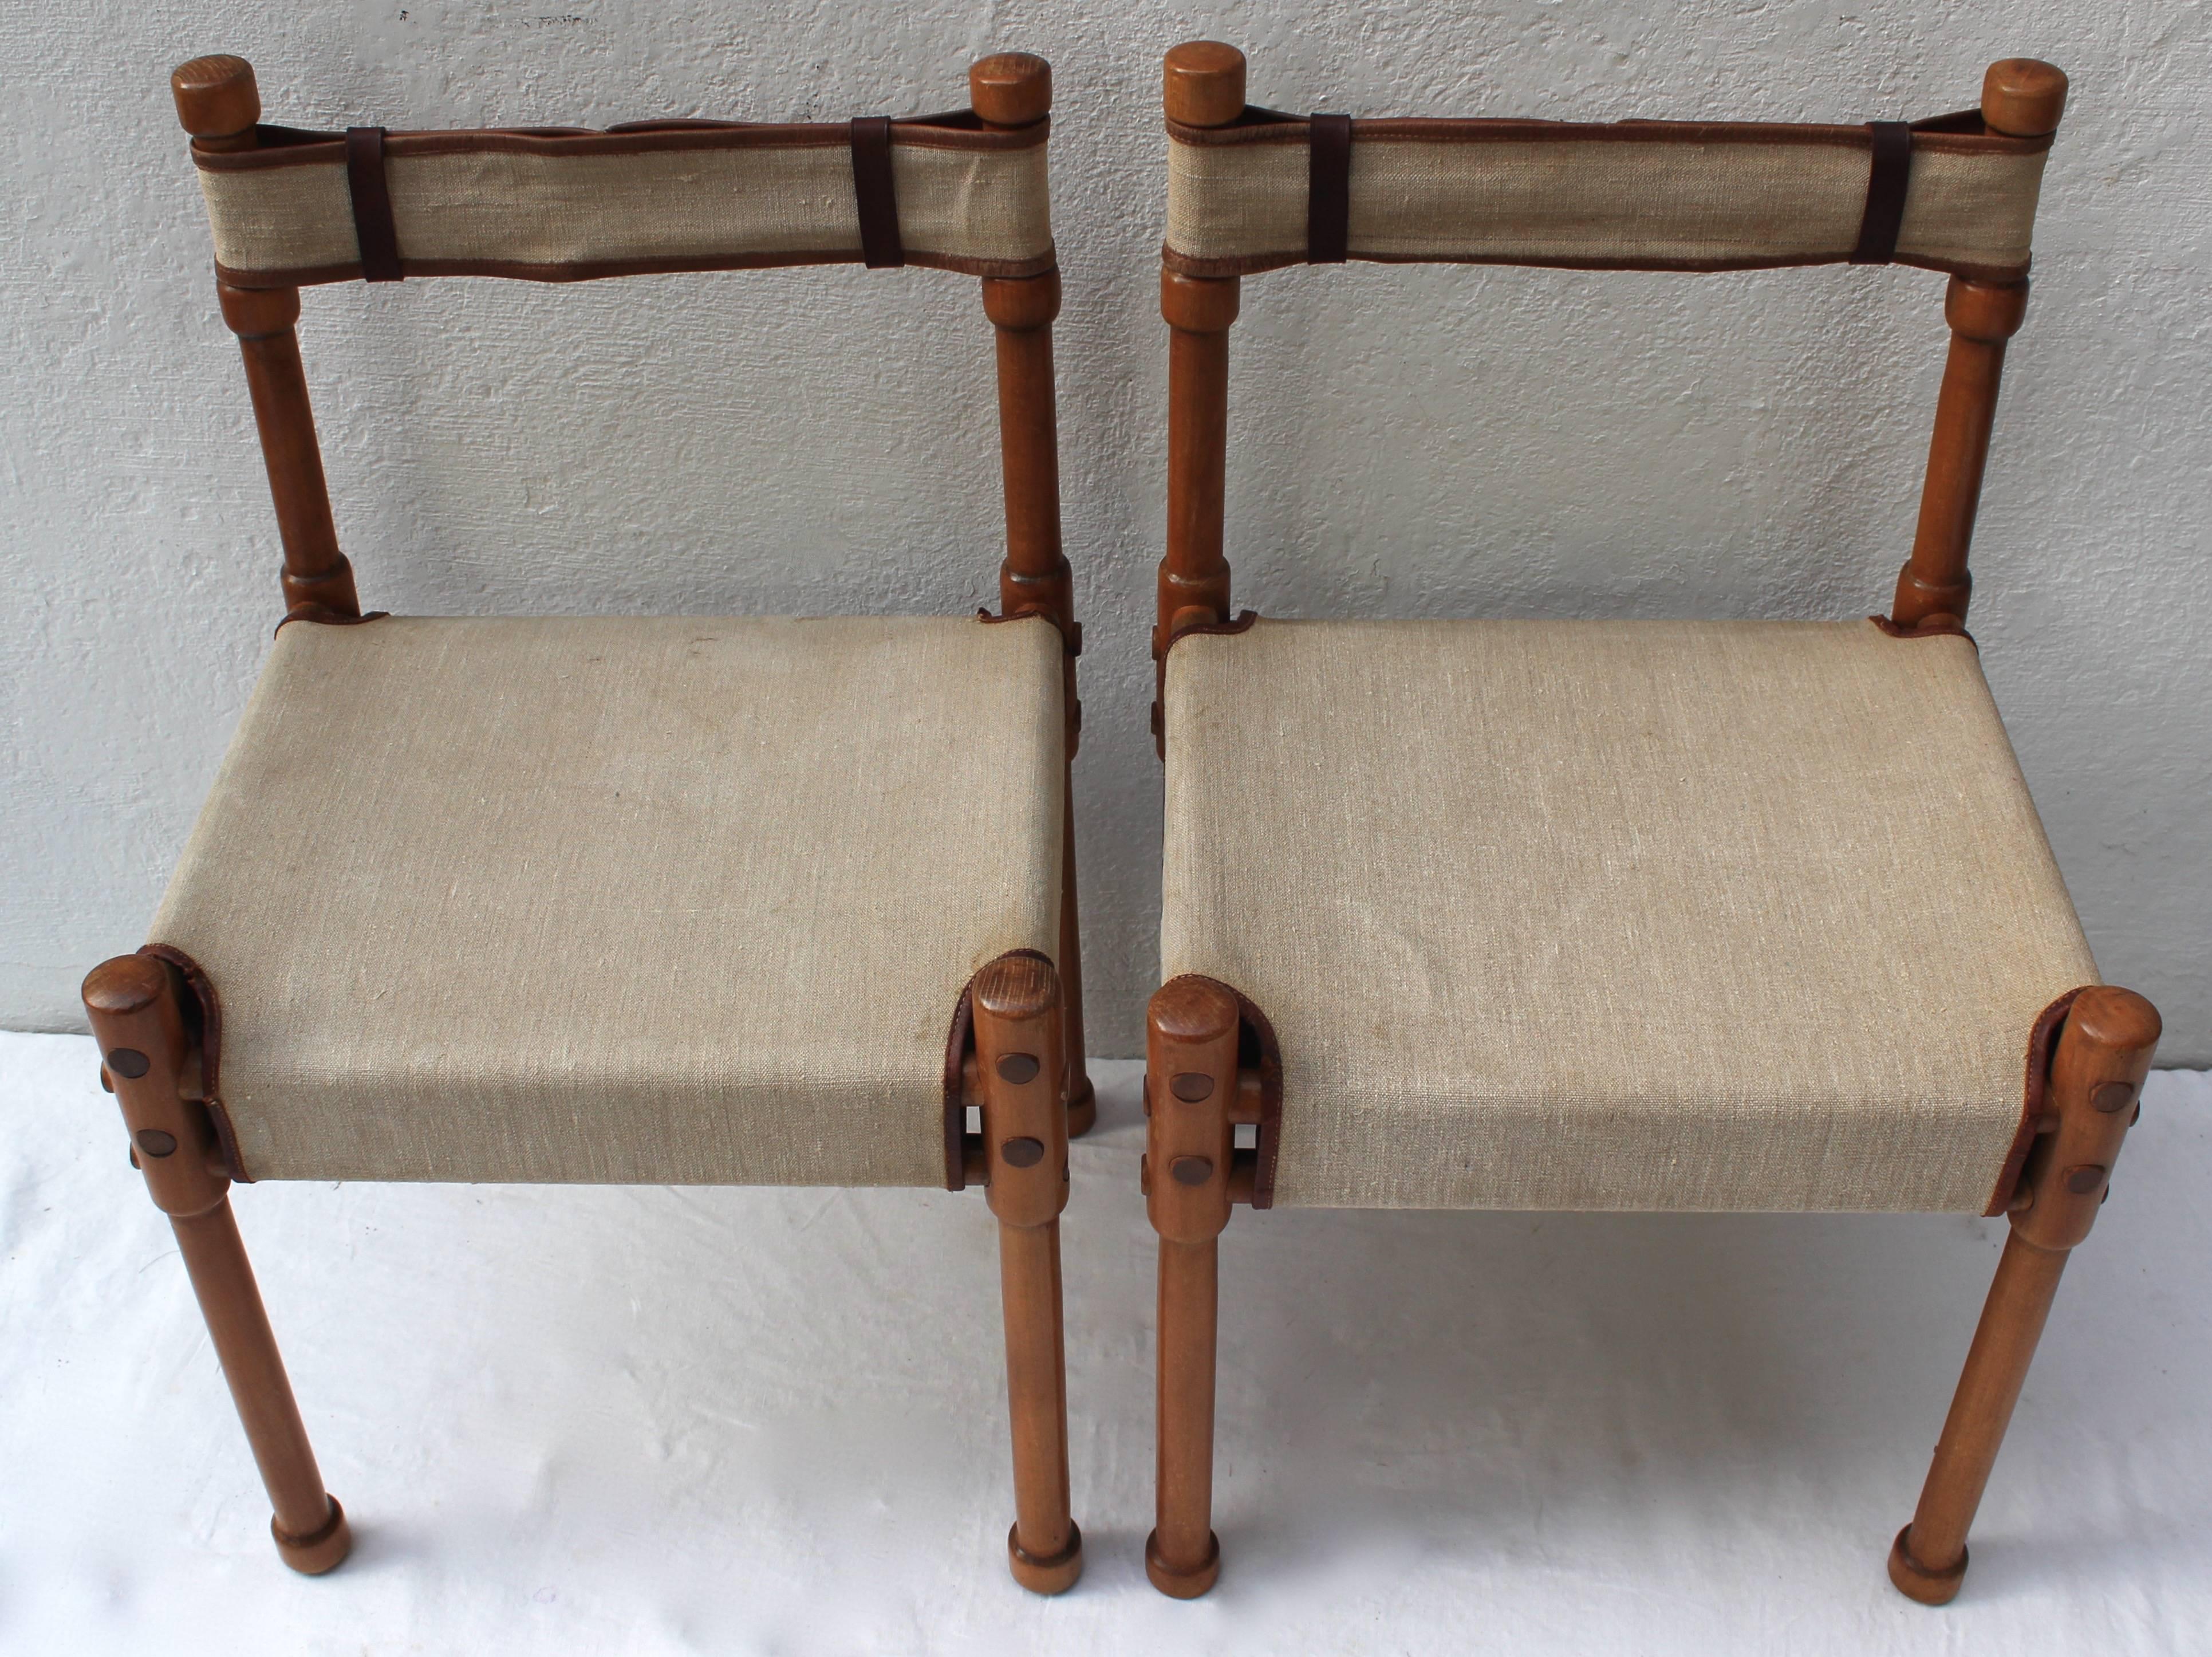 Beautifully restored pair of Campaign chairs with mortise and tenon construction... linen canvas and leather trim seat and back. Light use to piping.